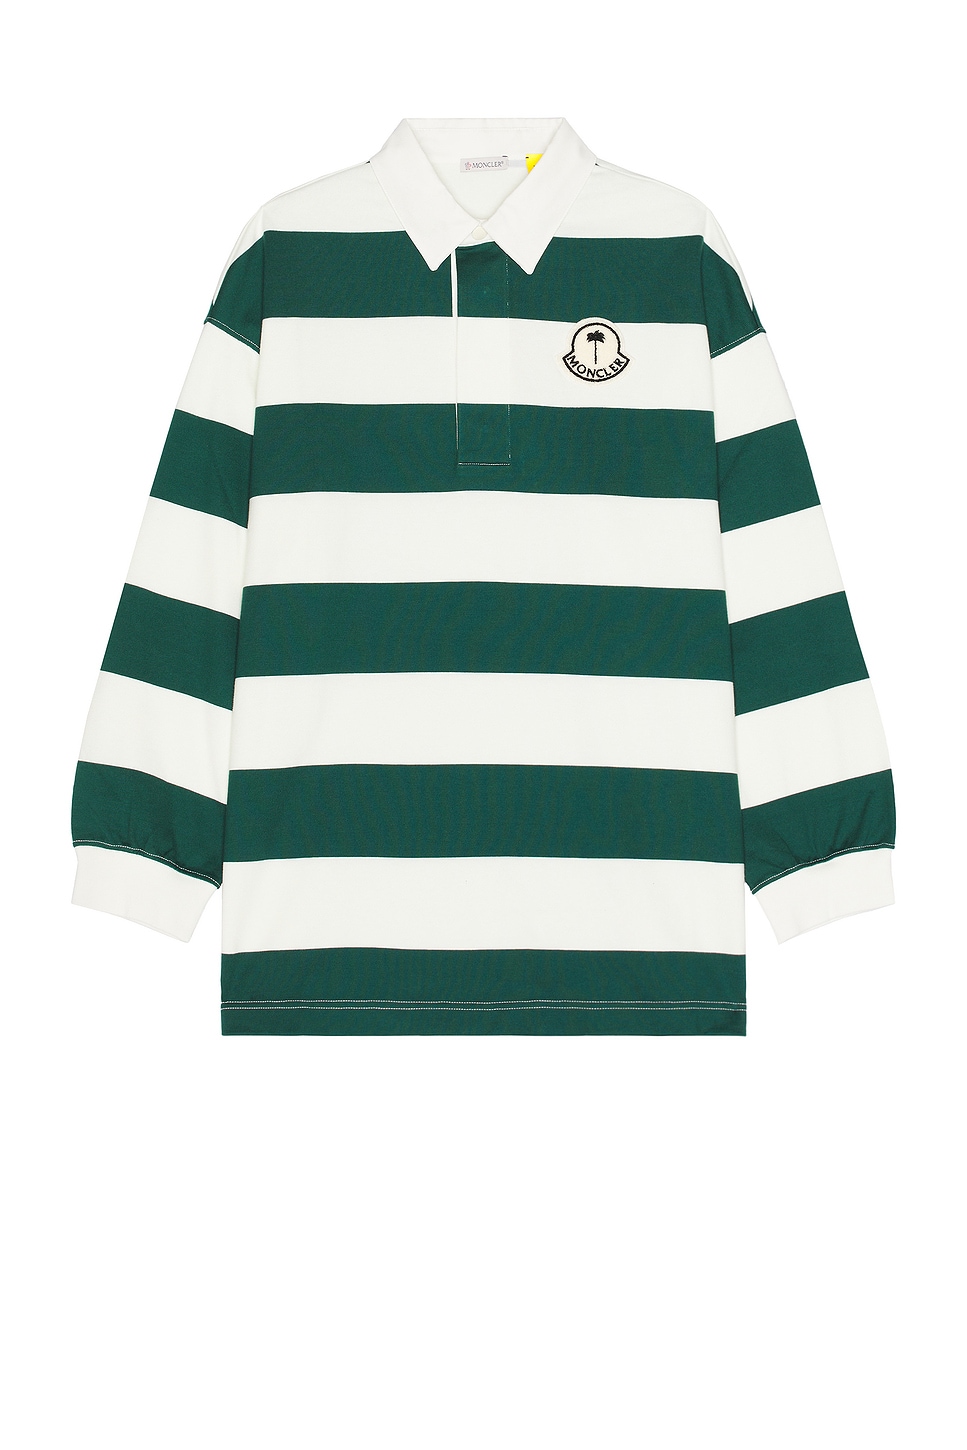 Image 1 of Moncler Genius x Palm Angels Long Sleeve Polo in White & Green